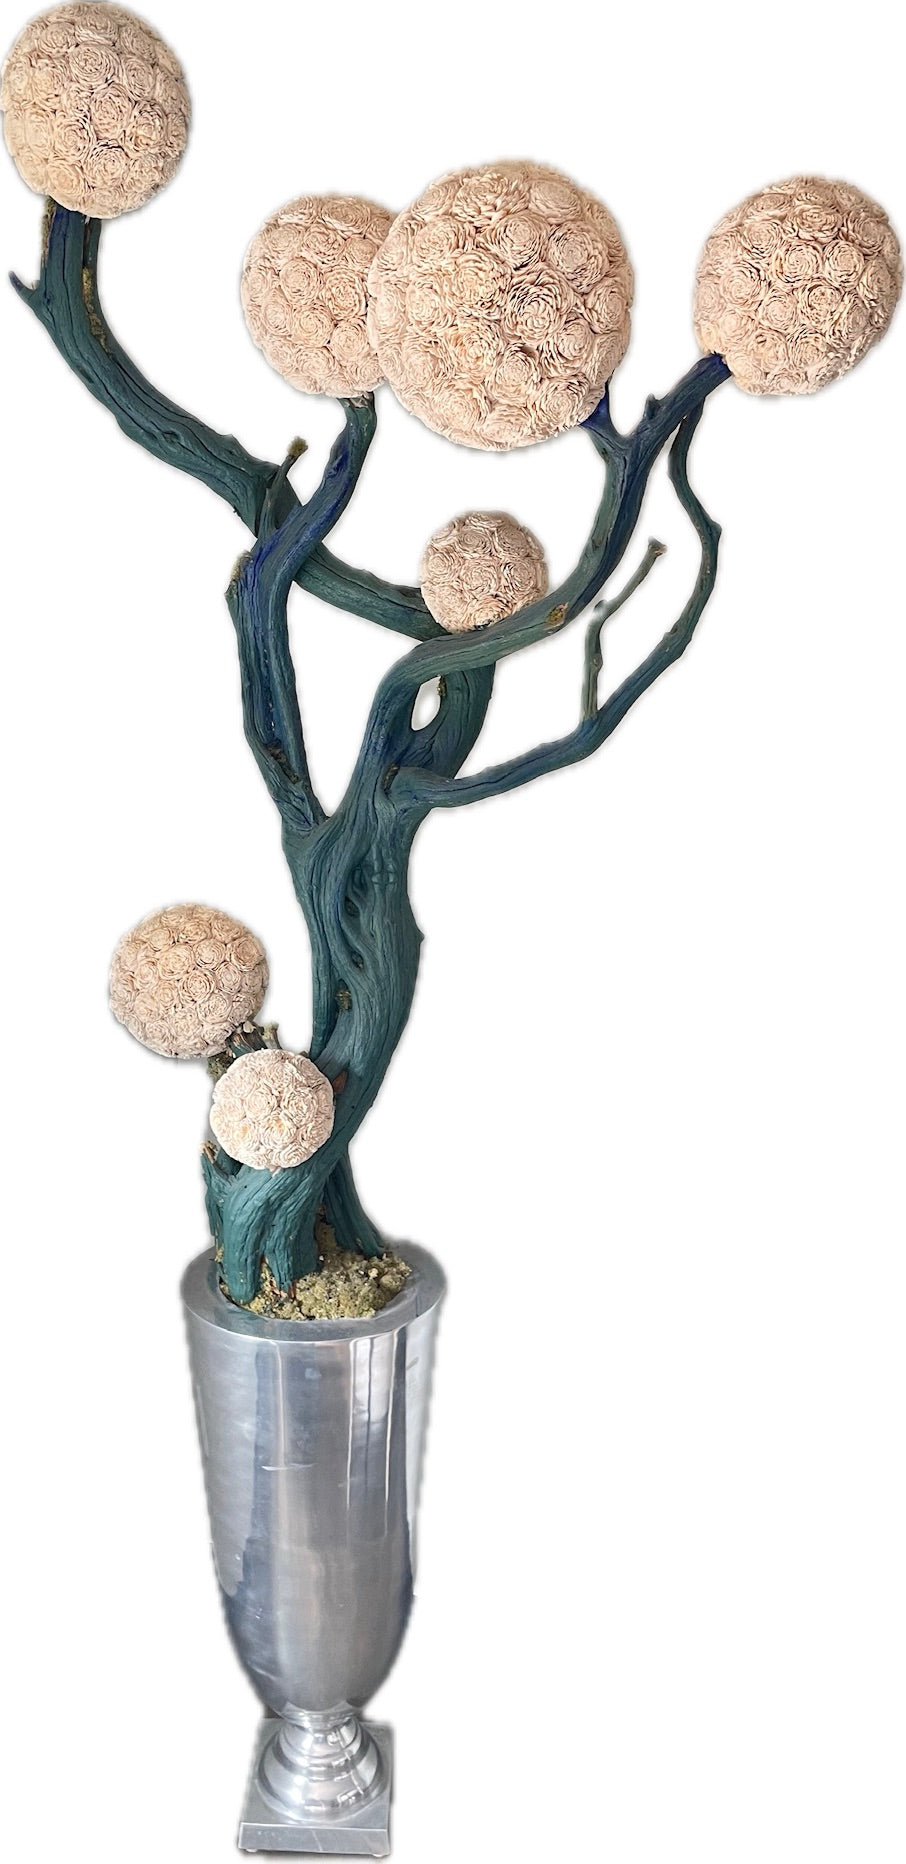 Lot 36: Dr. Suess tree in silver base painted by Adam Lambert